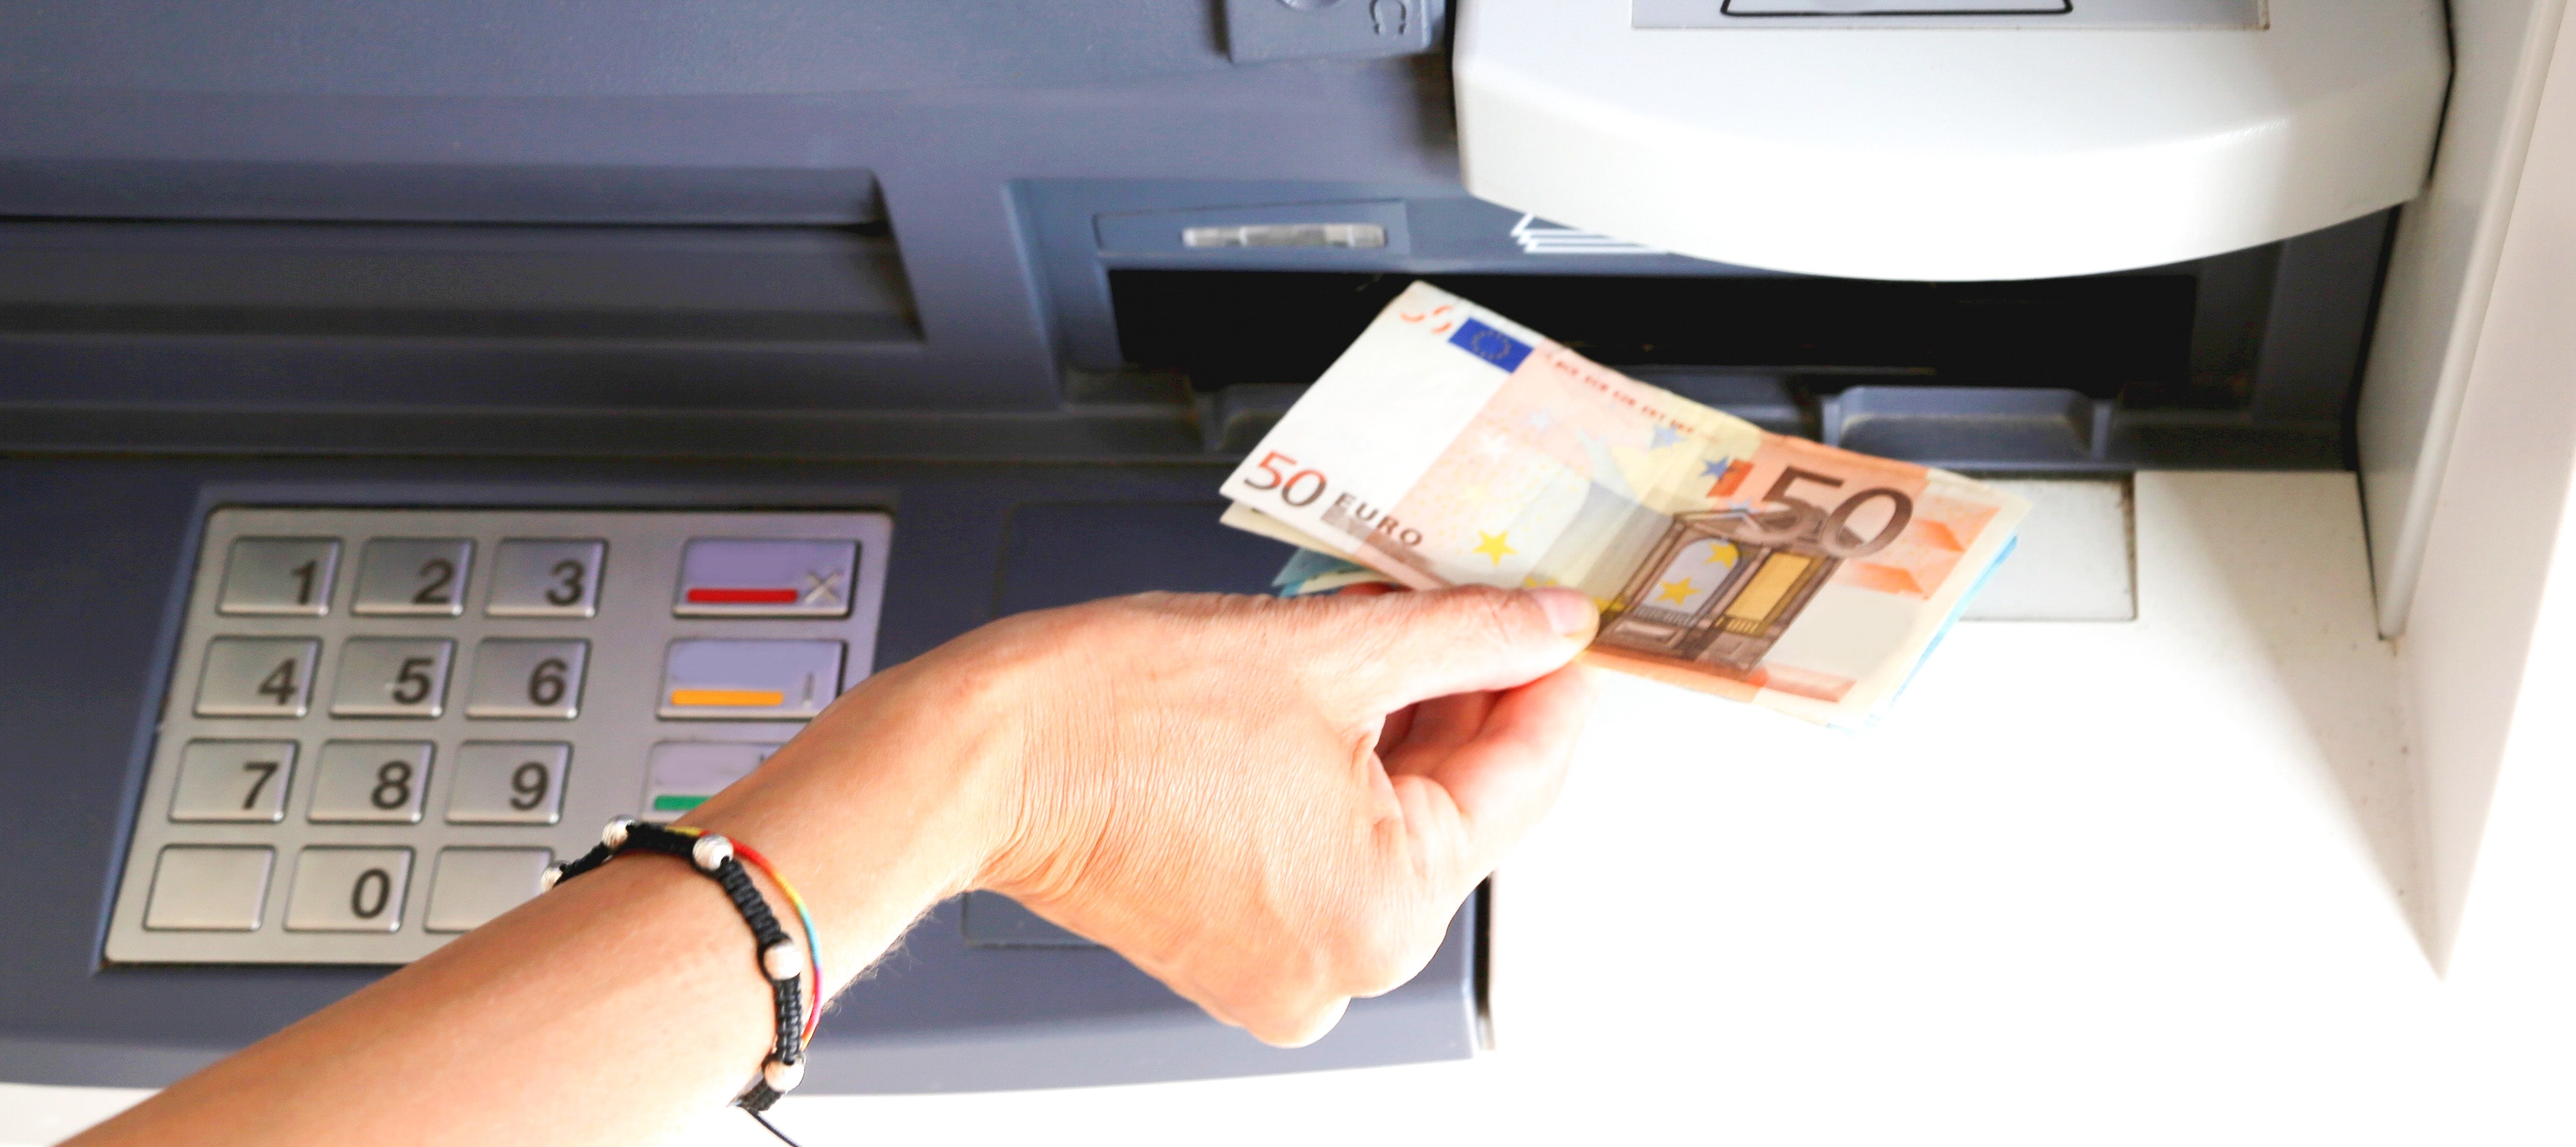 Woman withdrawing 50 euros from an ATM